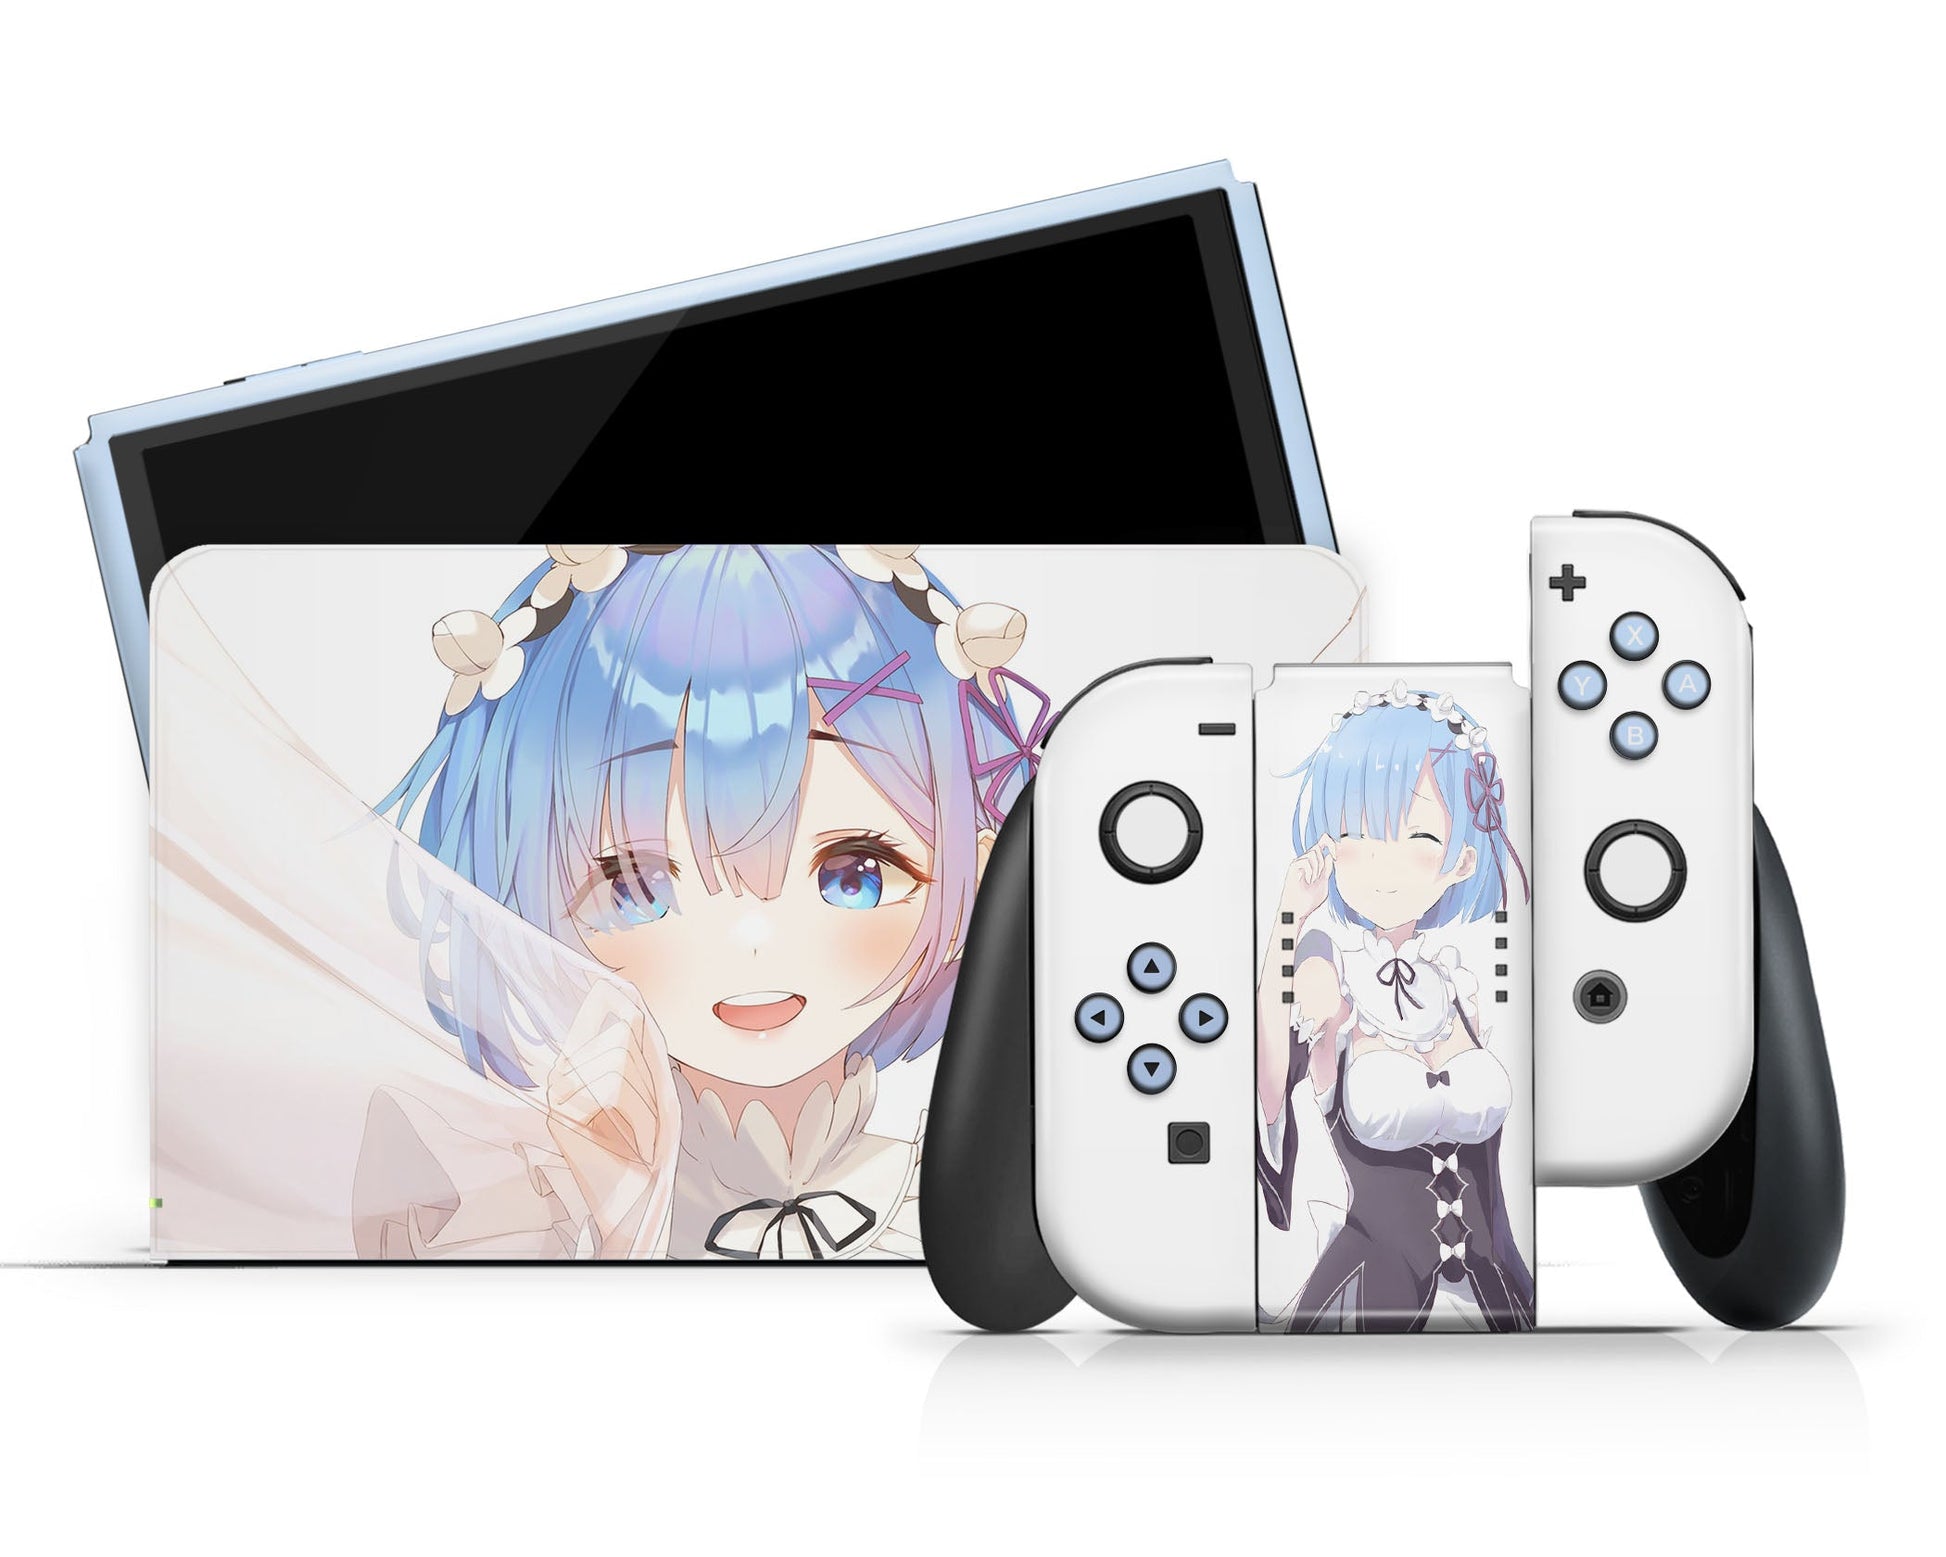 Anime Town Creations Nintendo Switch OLED Darling in the Franxx Rem Vinyl +Tempered Glass Skins - Anime Darling in the Franxx Switch OLED Skin